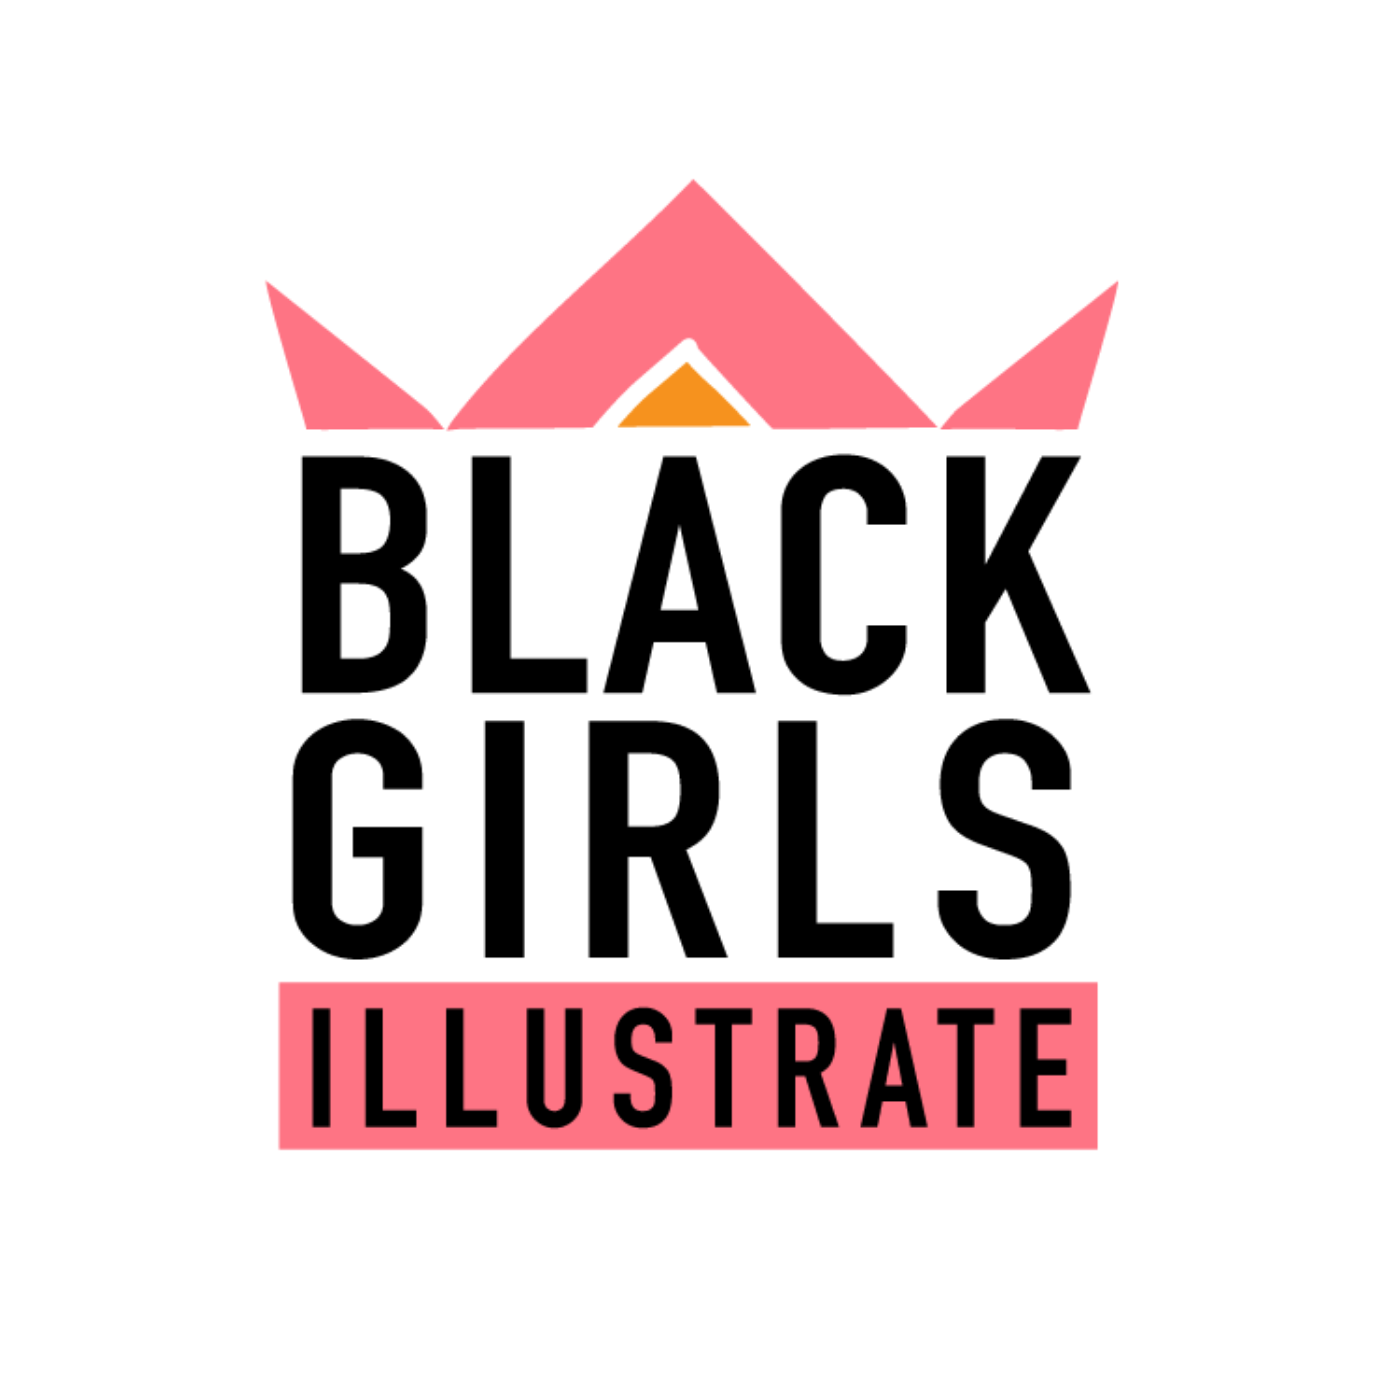 The Black Girls Illustrate logo, the words Black Girls Illustrate are in all caps in black font, one word in each of three rows. The word Illustrate is highlighed in pink and a pink crown is at the top of the logo with a yellow triangle in the center like a jewel. 